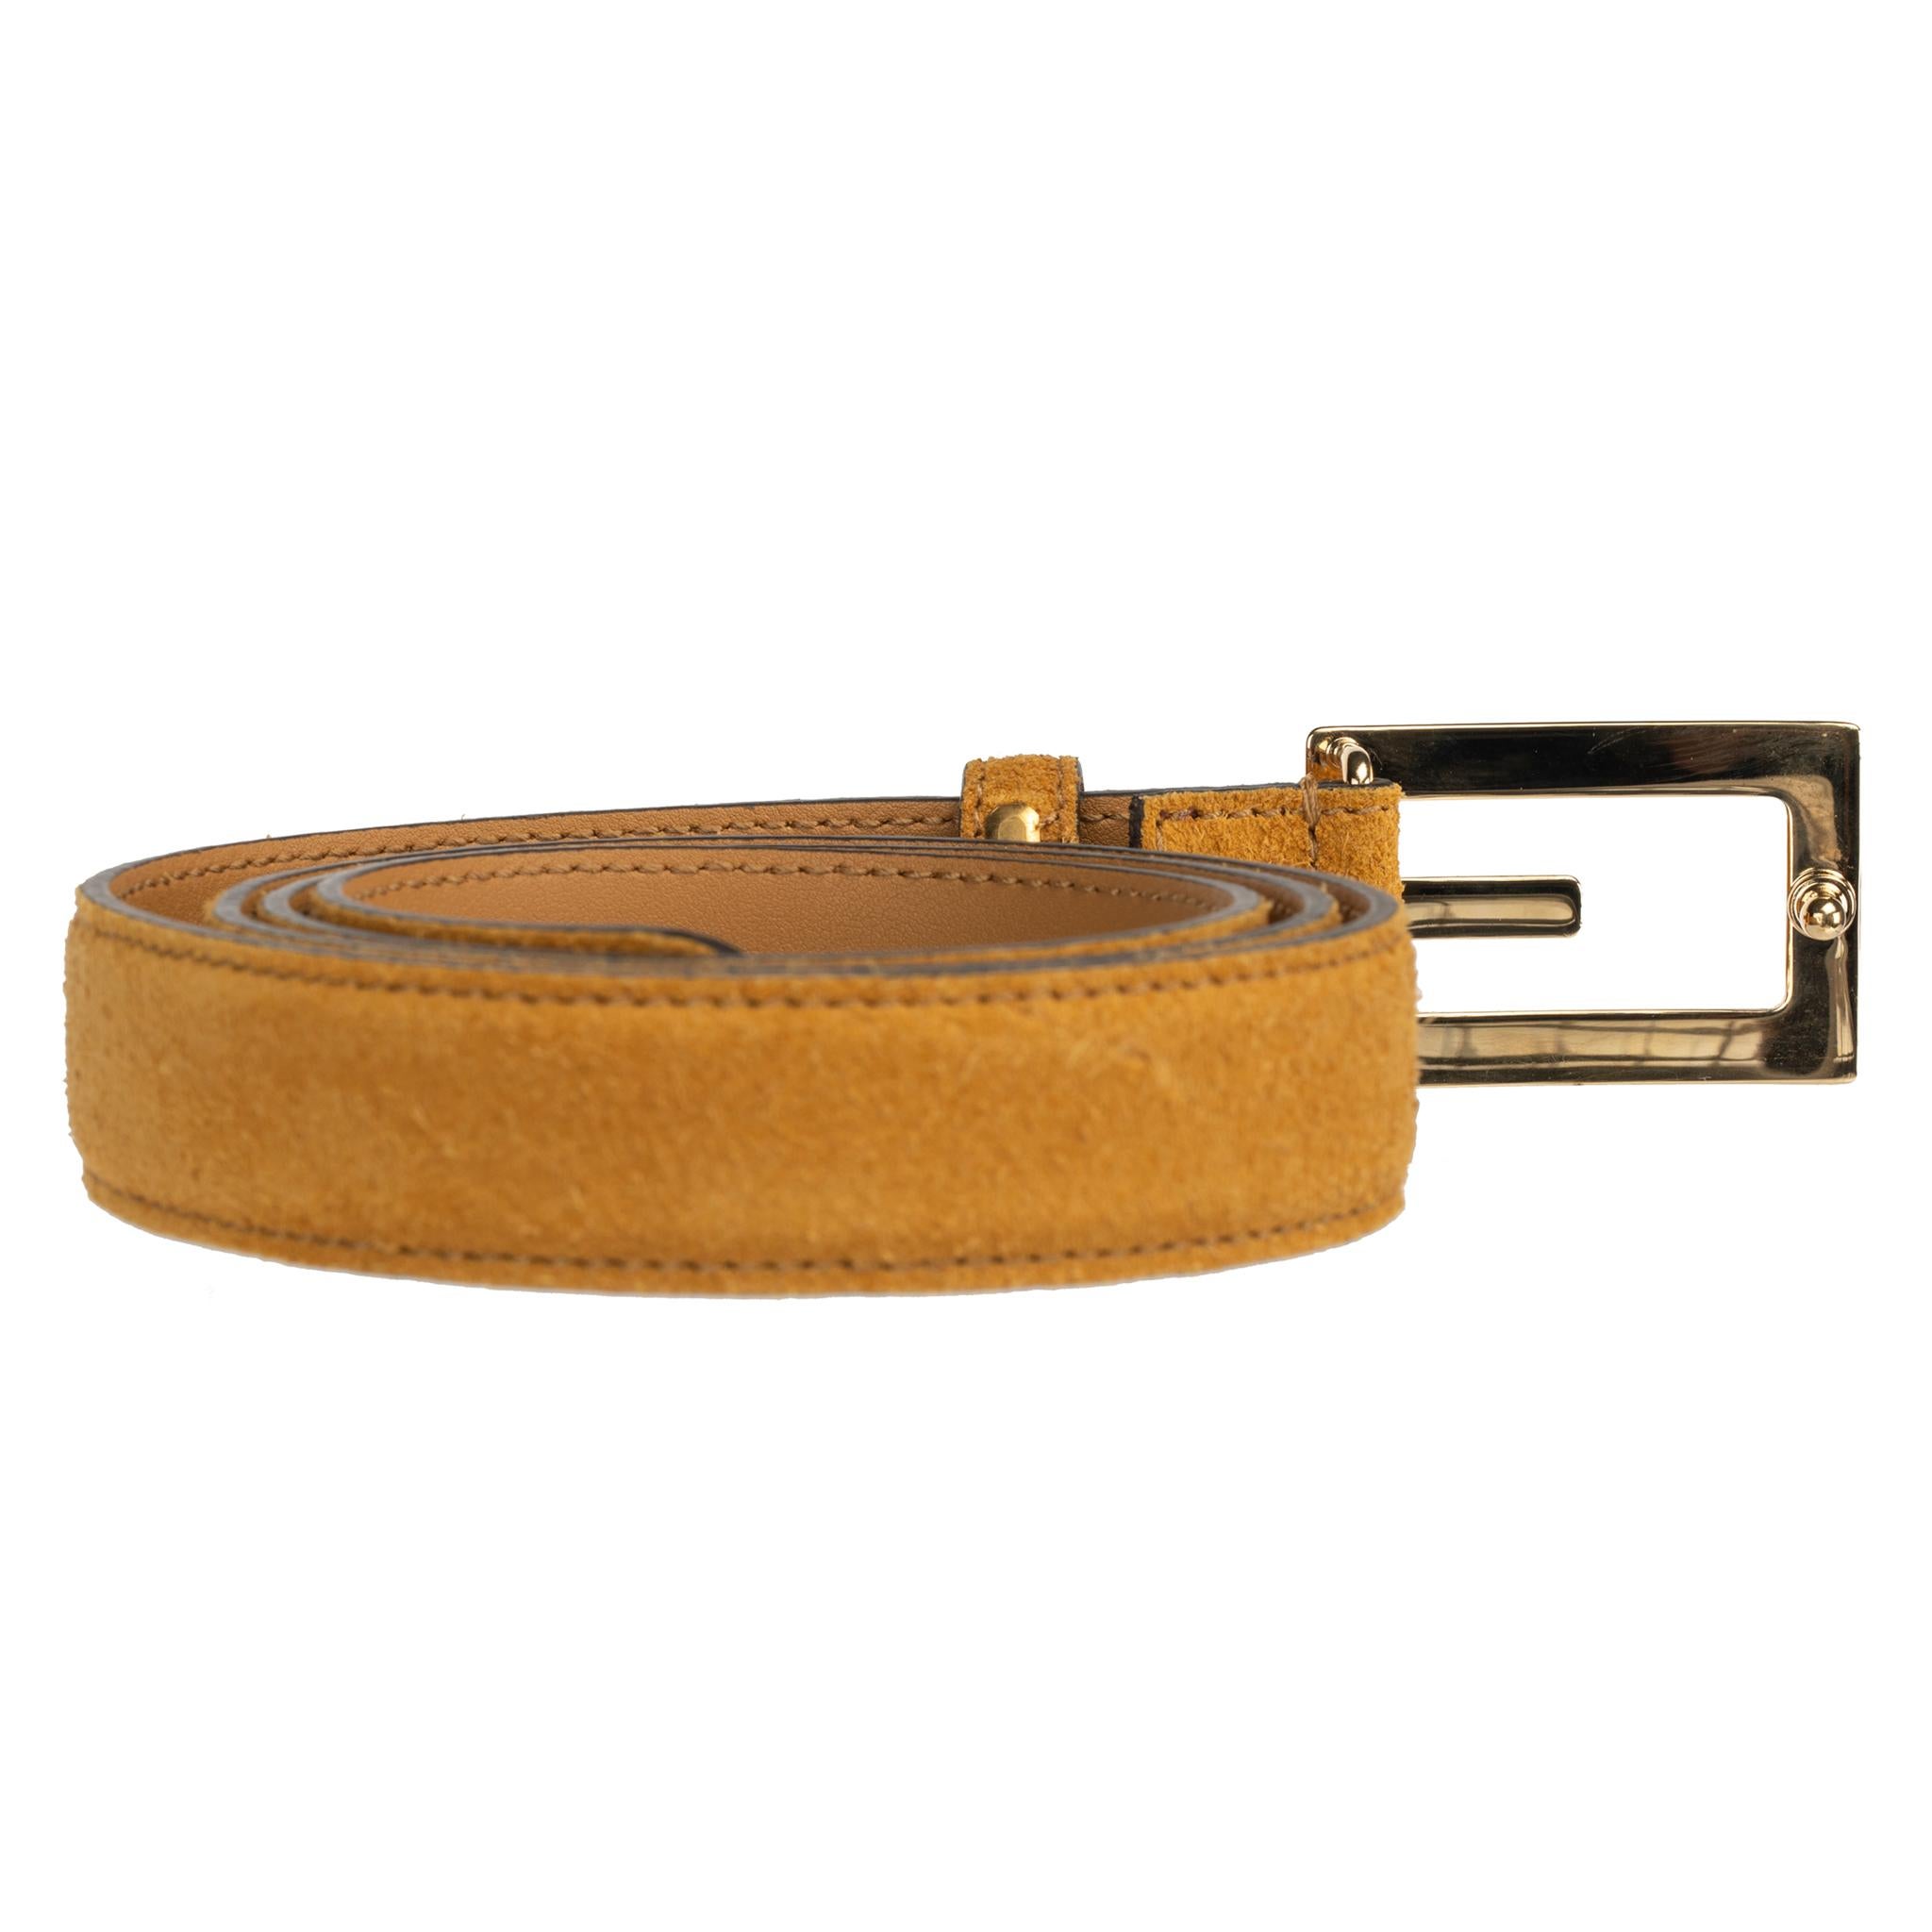 Gucci Icaro Belt Saffron Suede Leather Gold Hardware In New Condition For Sale In DOUBLE BAY, NSW